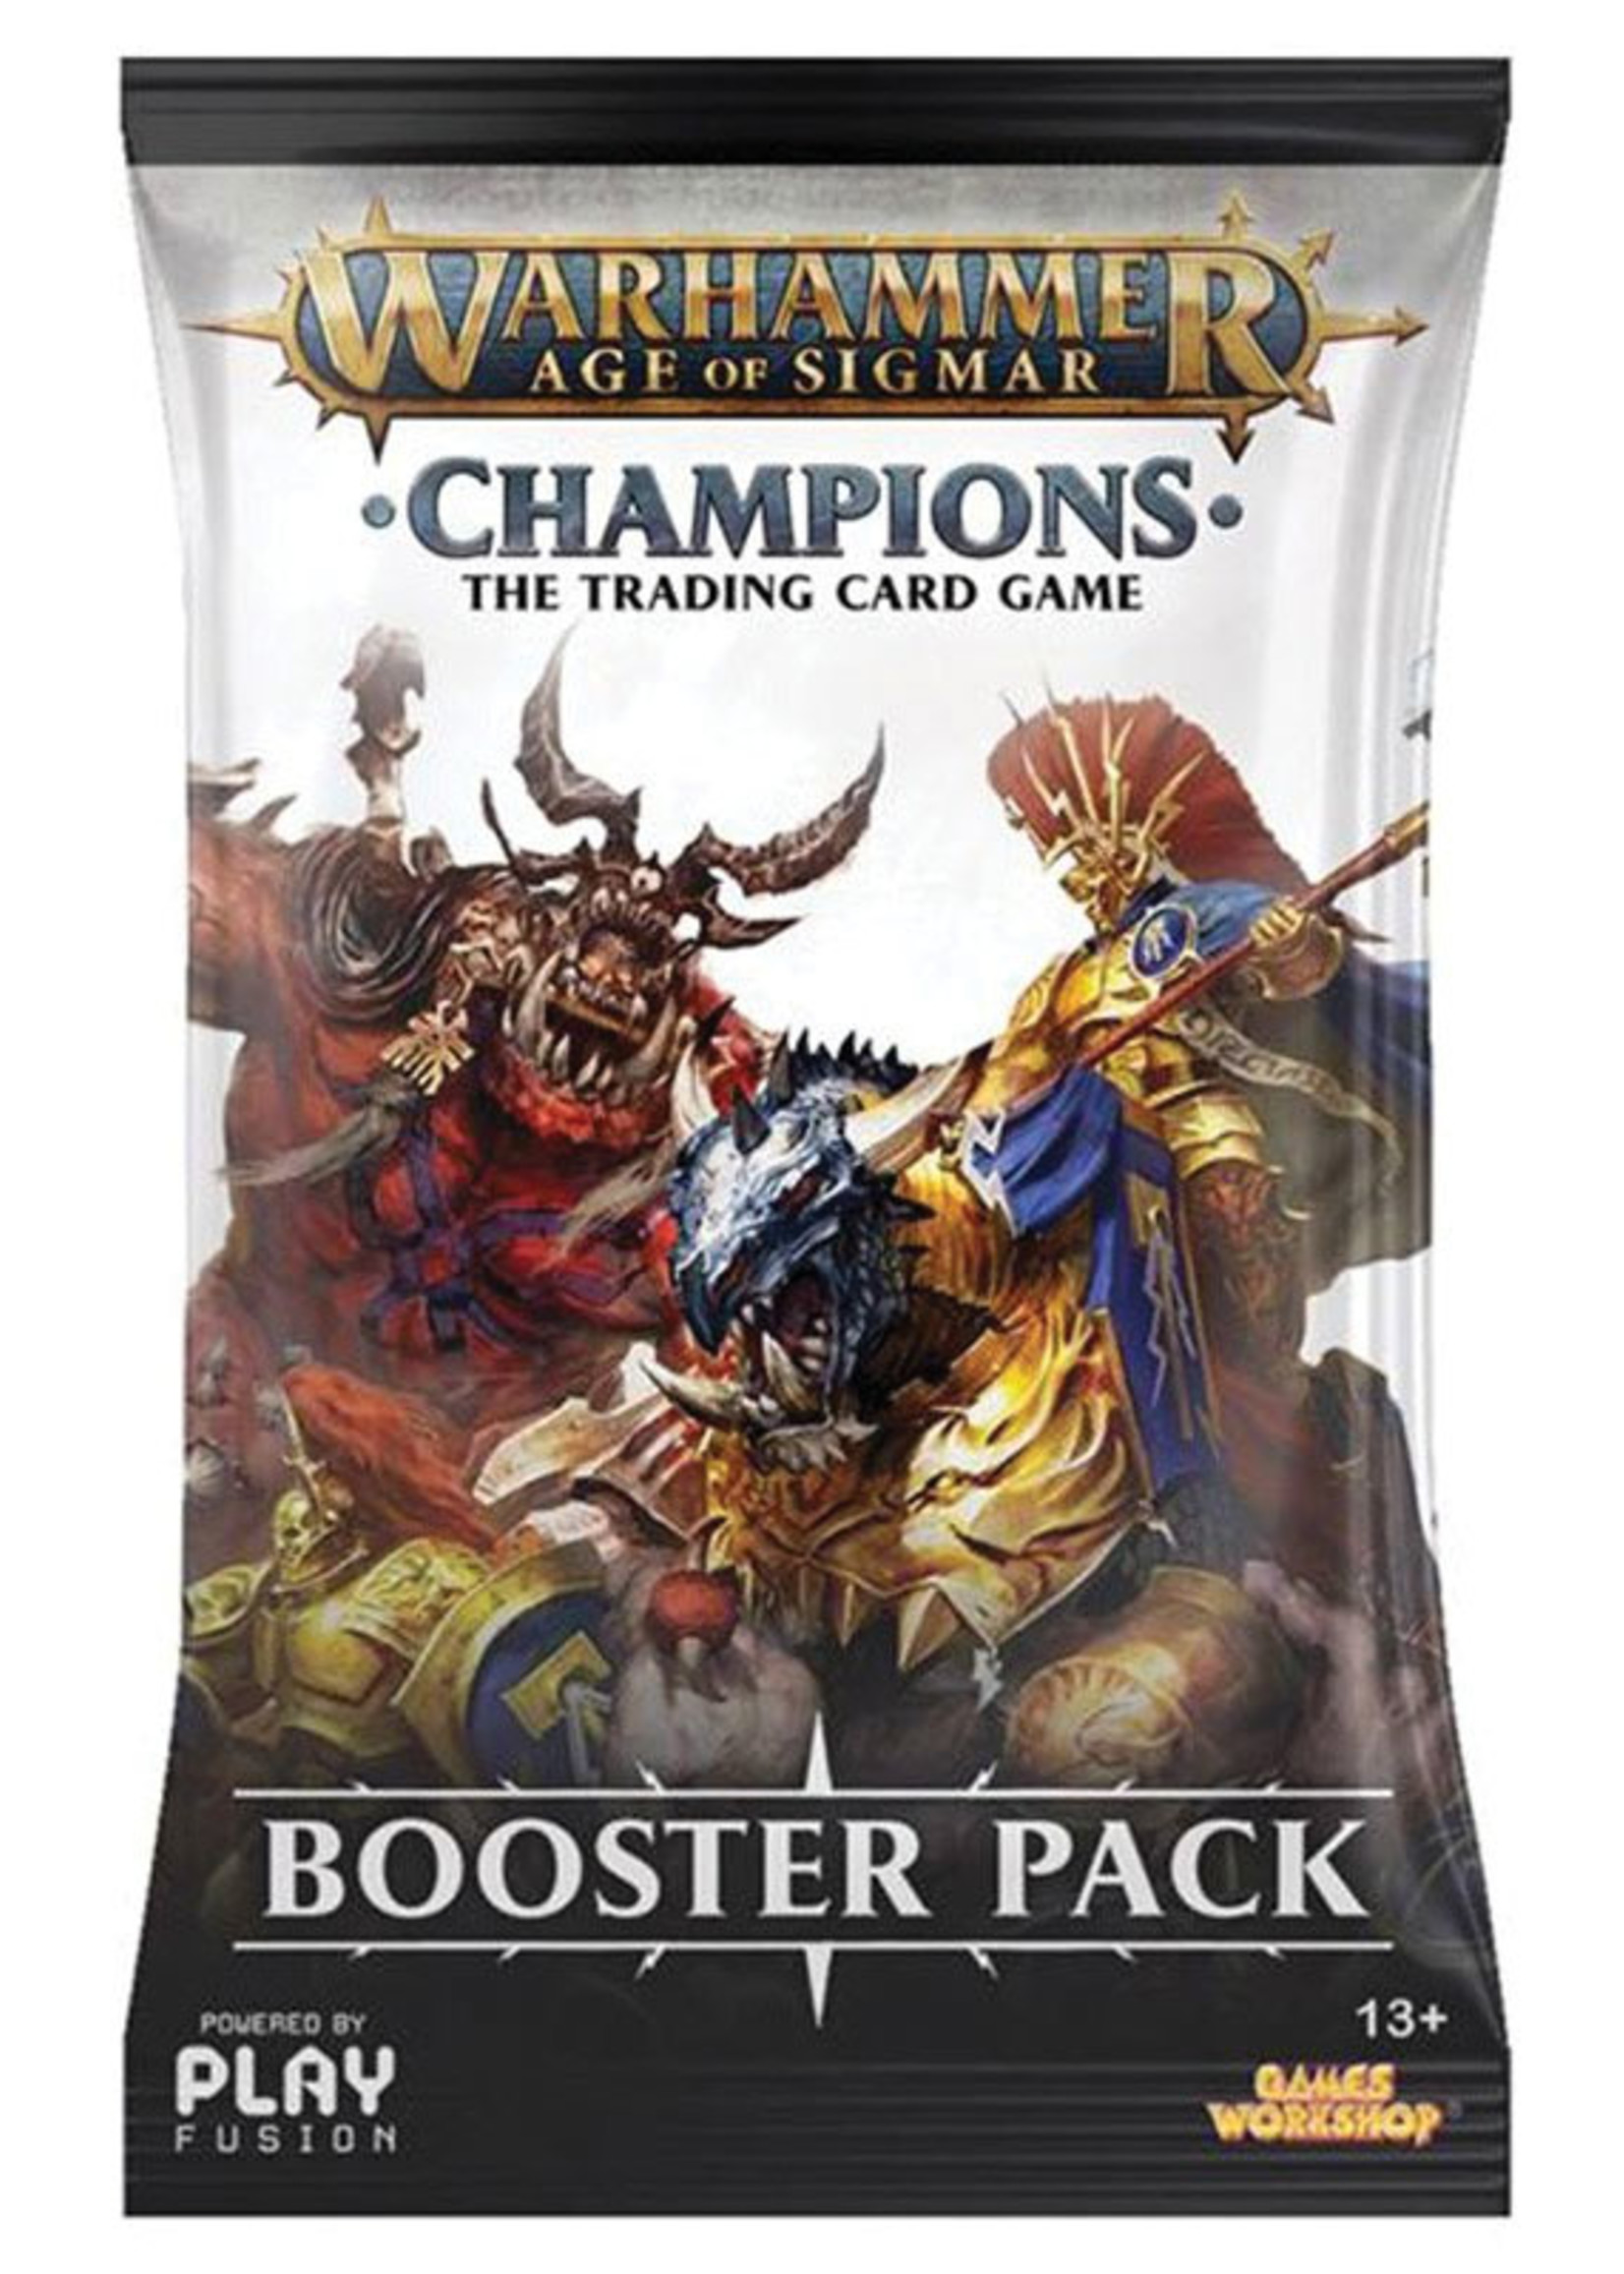 Playfusion, INC Warhammer: Age of Sigmar TCG - Champions Booster Pack